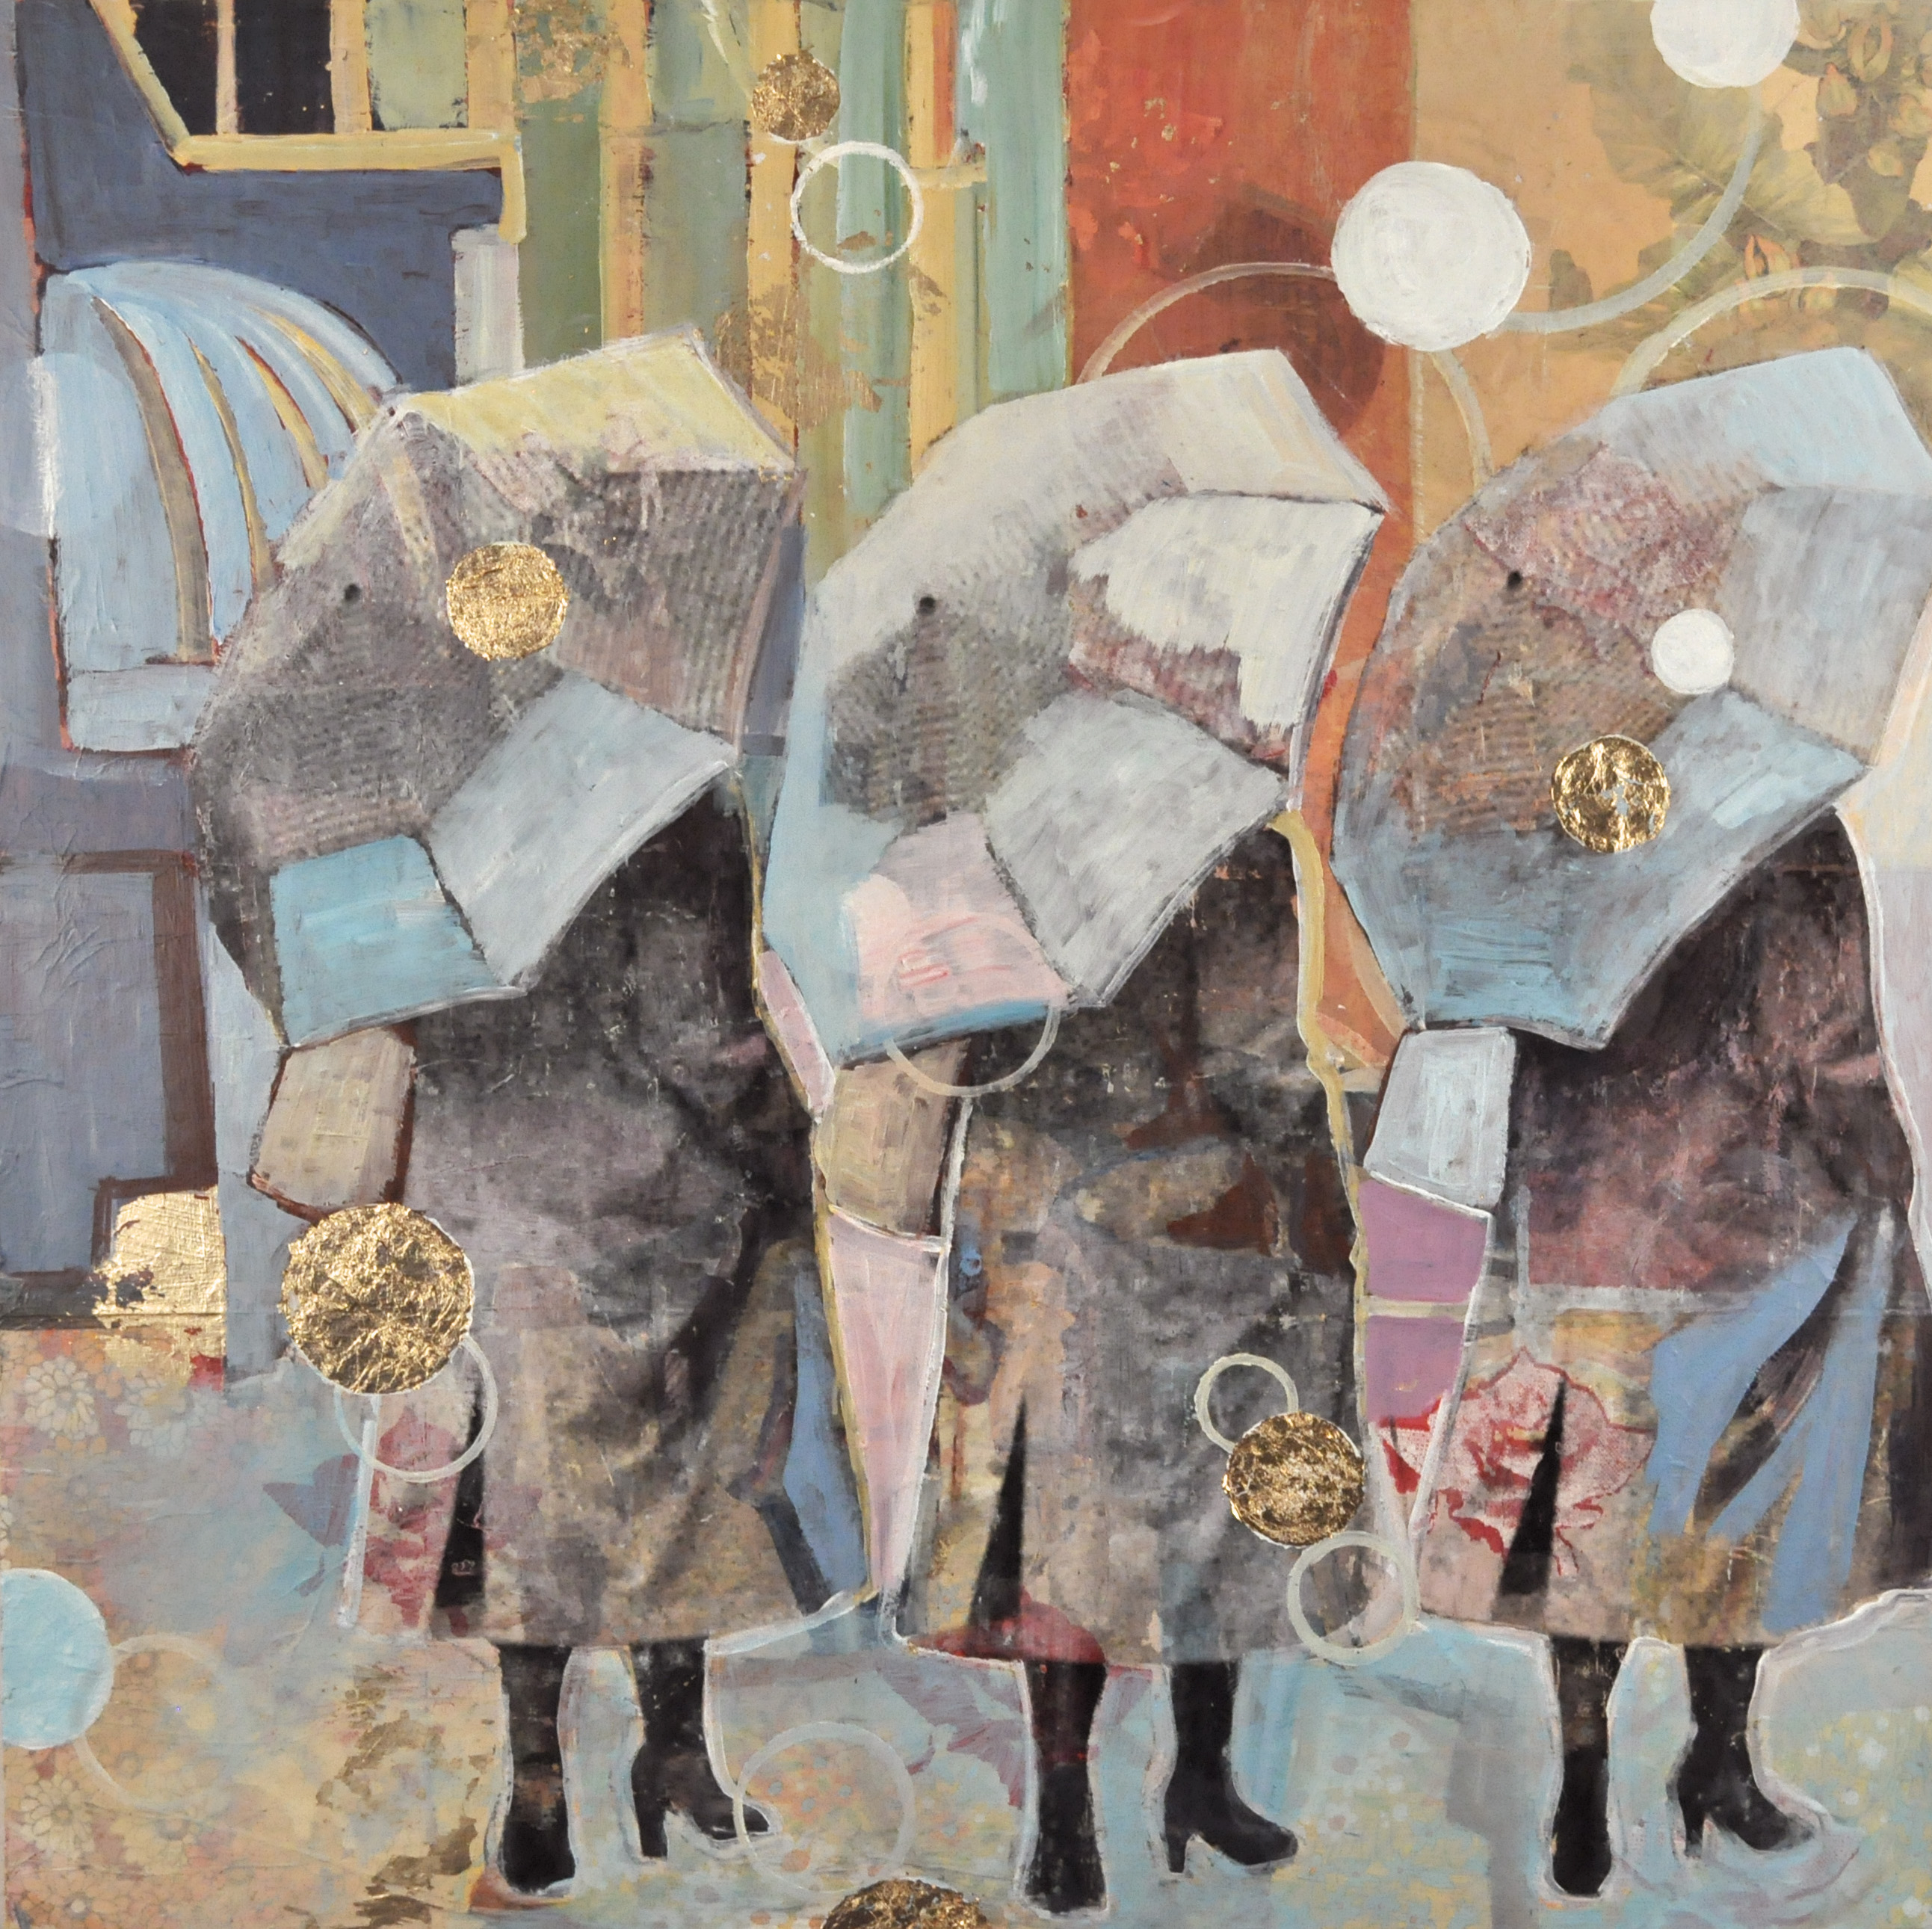 Sounds of everyday life on a rainy day. Three ladies walking with gold bubbles.